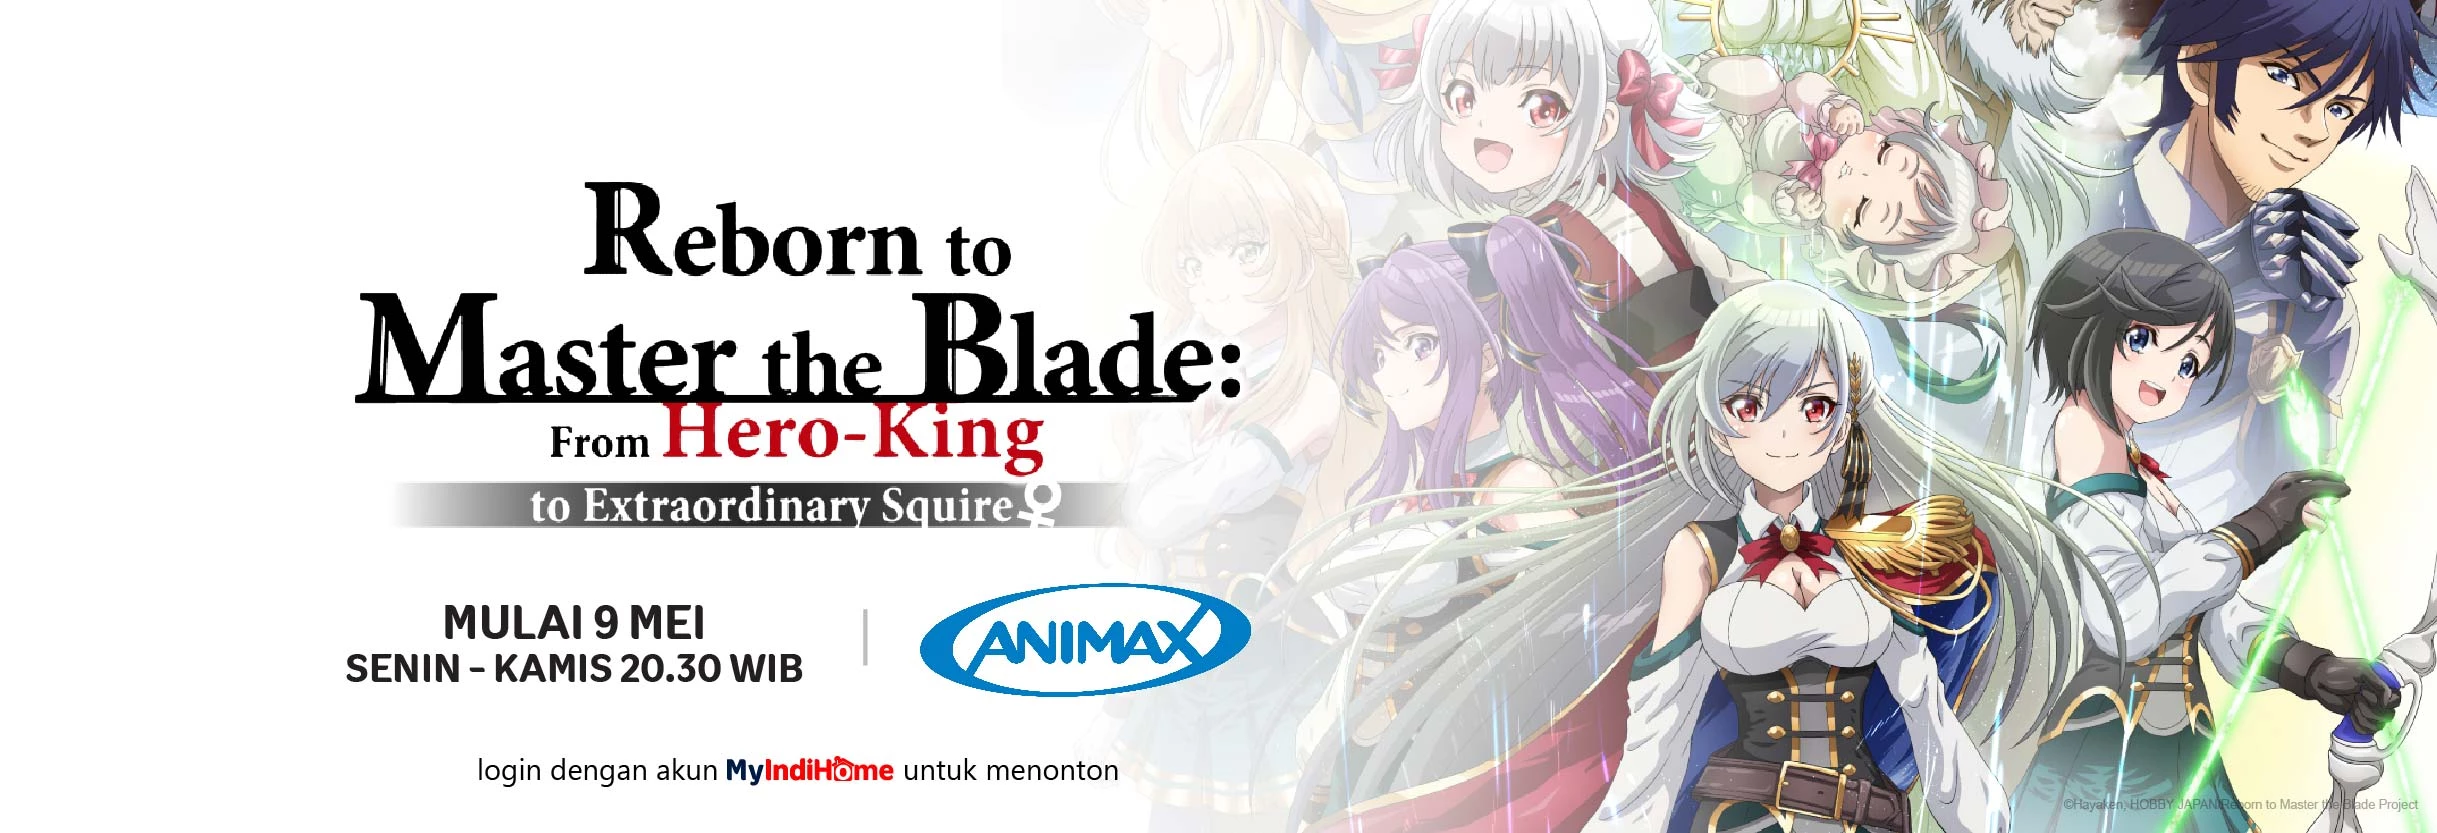 Reborn To Master The Blade From Hero King To Extraordinary Squire